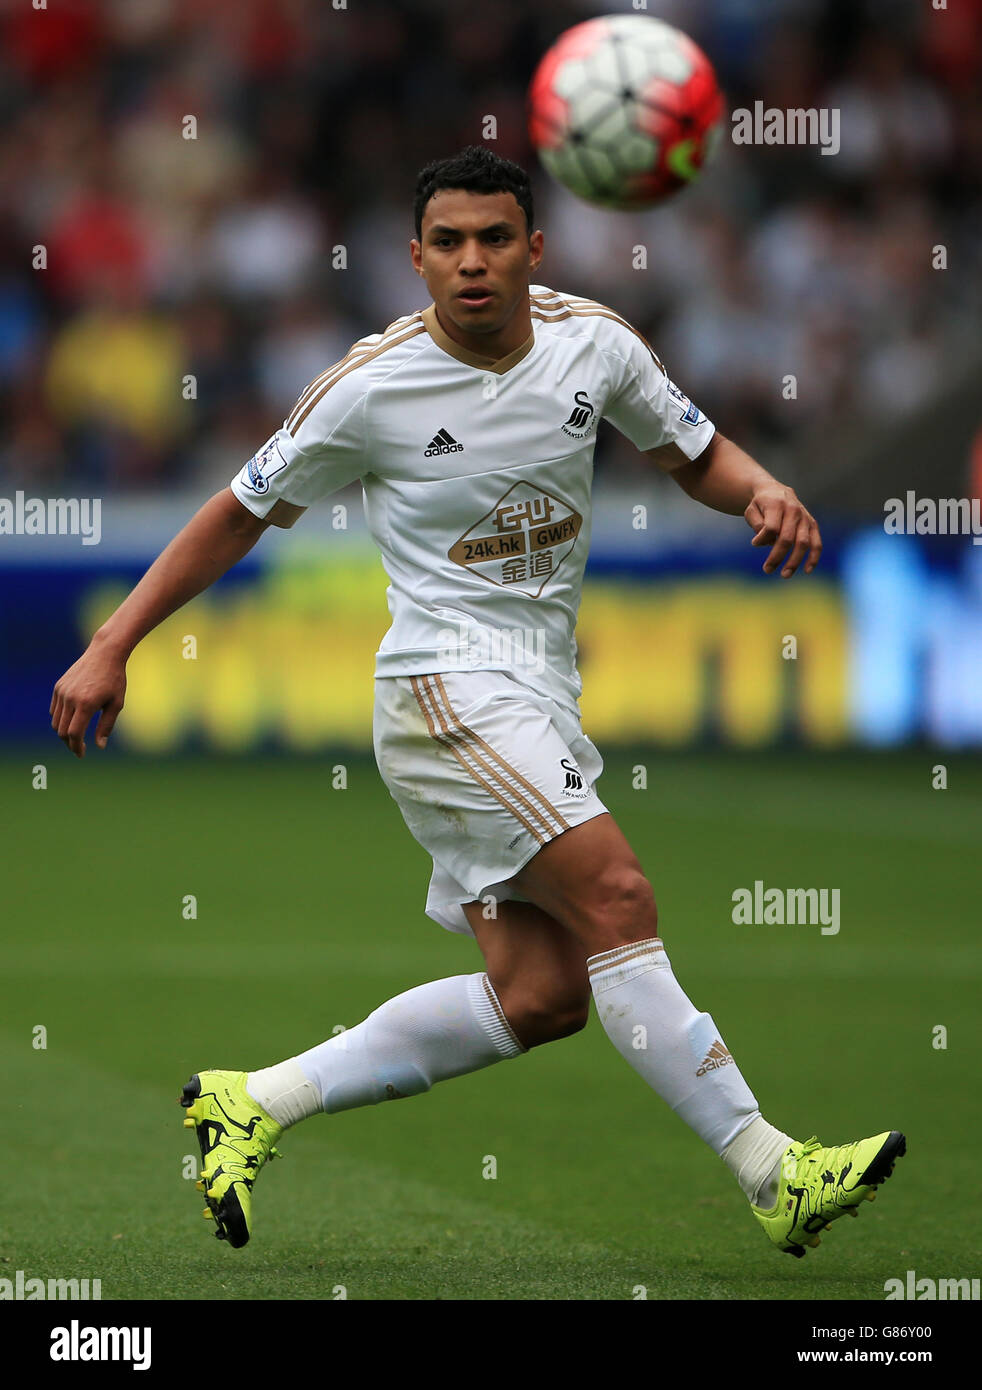 Swansea City's Jefferson Montero, during the Barclays Premier League match at the Liberty Stadium, Swansea. PRESS ASSOCIATION Photo. Picture date: Saturday August 14, 2015. See PA story SOCCER Swansea. Photo credit should read: Nick Potts/PA Wire. . No use with unauthorised audio, video, data, fixture lists, club/league logos or 'live' services. Online in-match use limited to 45 images, no video emulation. No use in betting, games or single club/league/player publications. Stock Photo